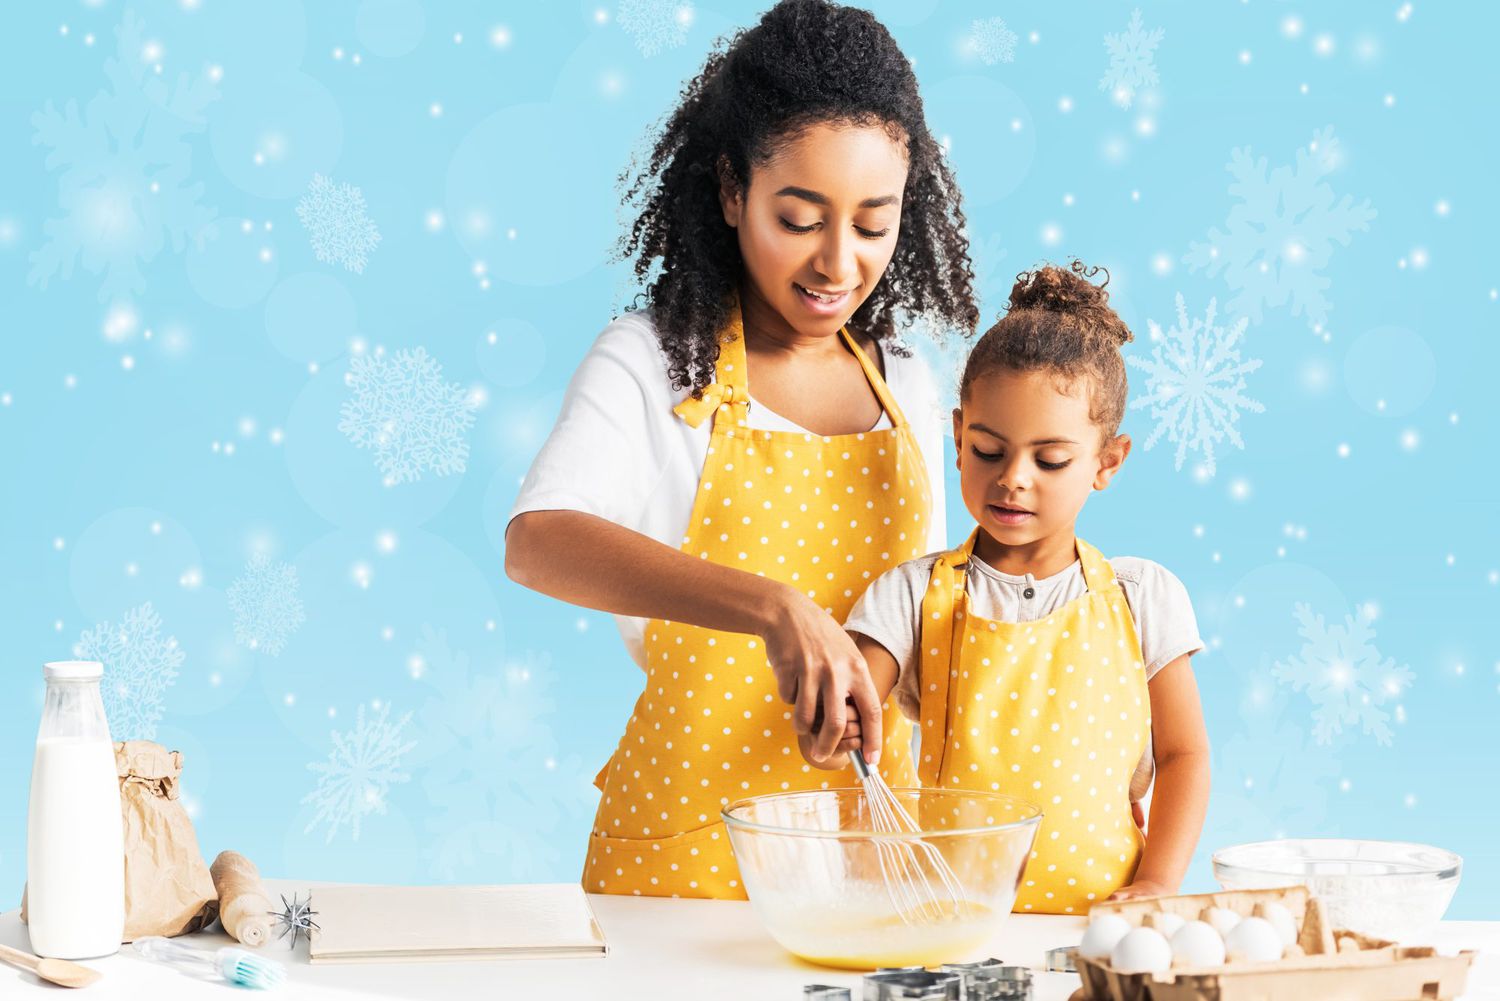 A woman and her daughter baking together with snowflakes in the background